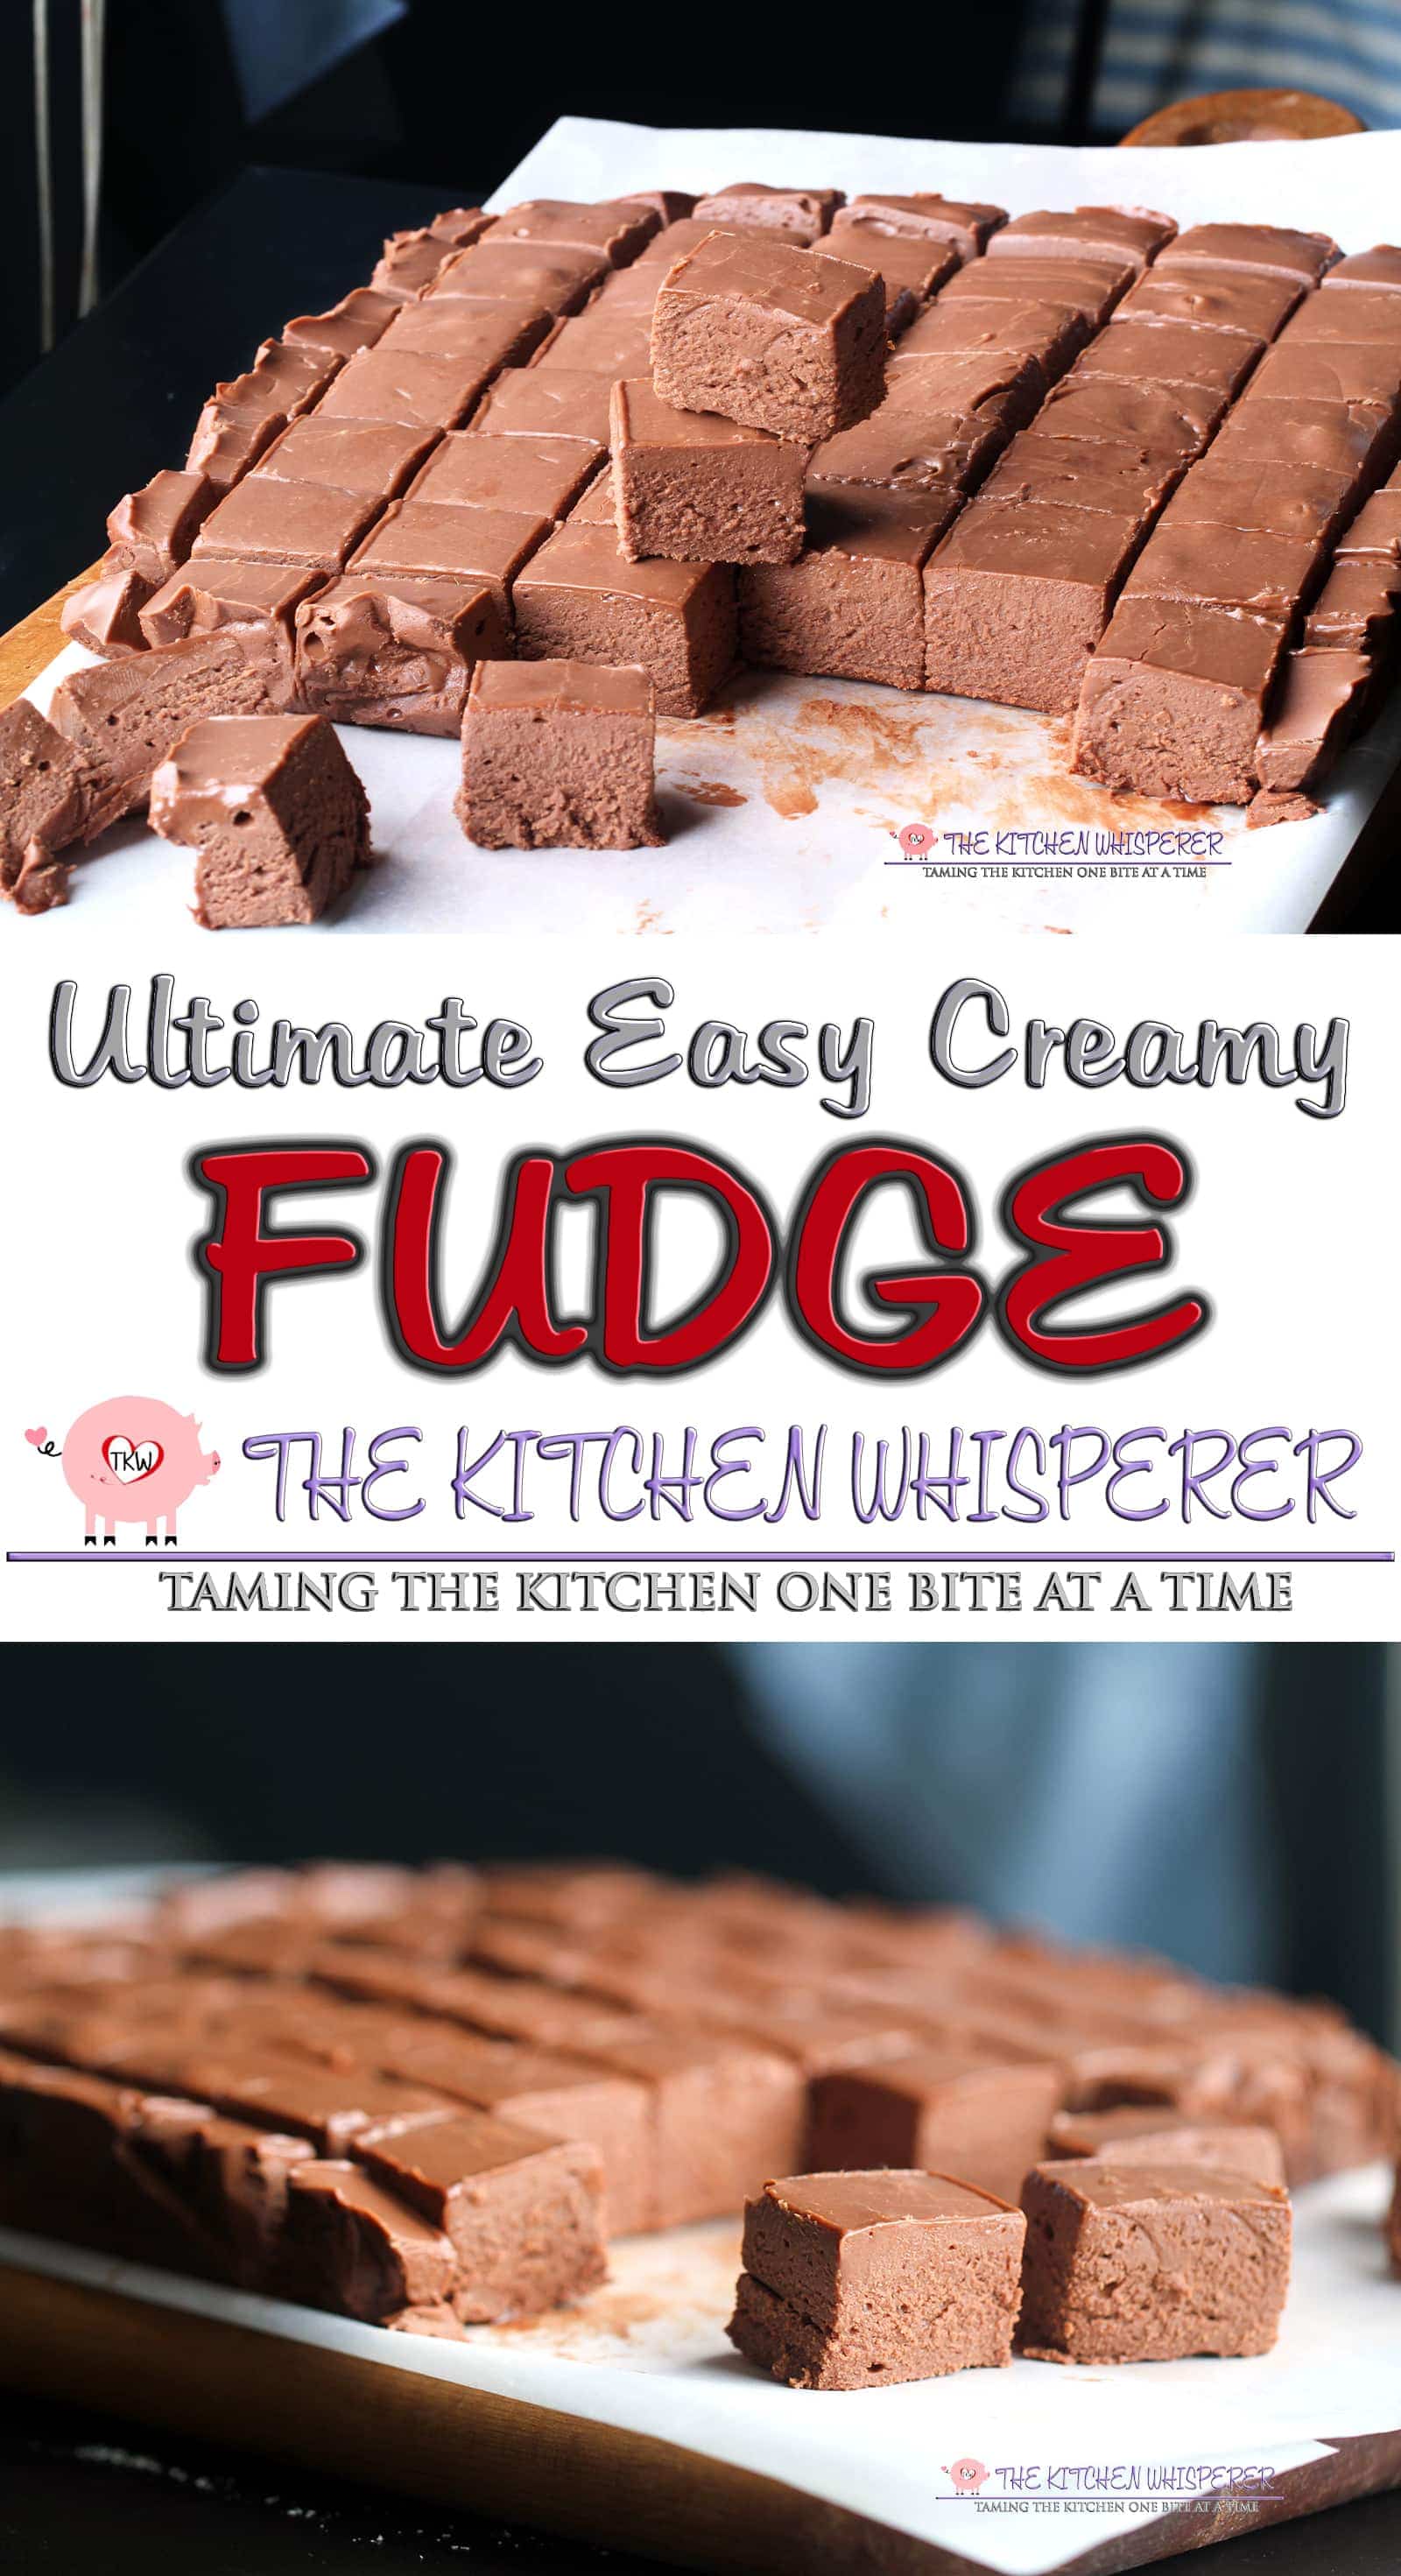 This is truly the Ultimate Easy Creamy No-Fail Chocolate Fudge. Just a few minutes is all it takes to make this seriously delicious, super creamy, no fail fudge! best fudge recipe, easy chocolate fudge, no fail christmas fudge, Mom's fudge recipe, #fudge #chocolatefudge #christmascandy